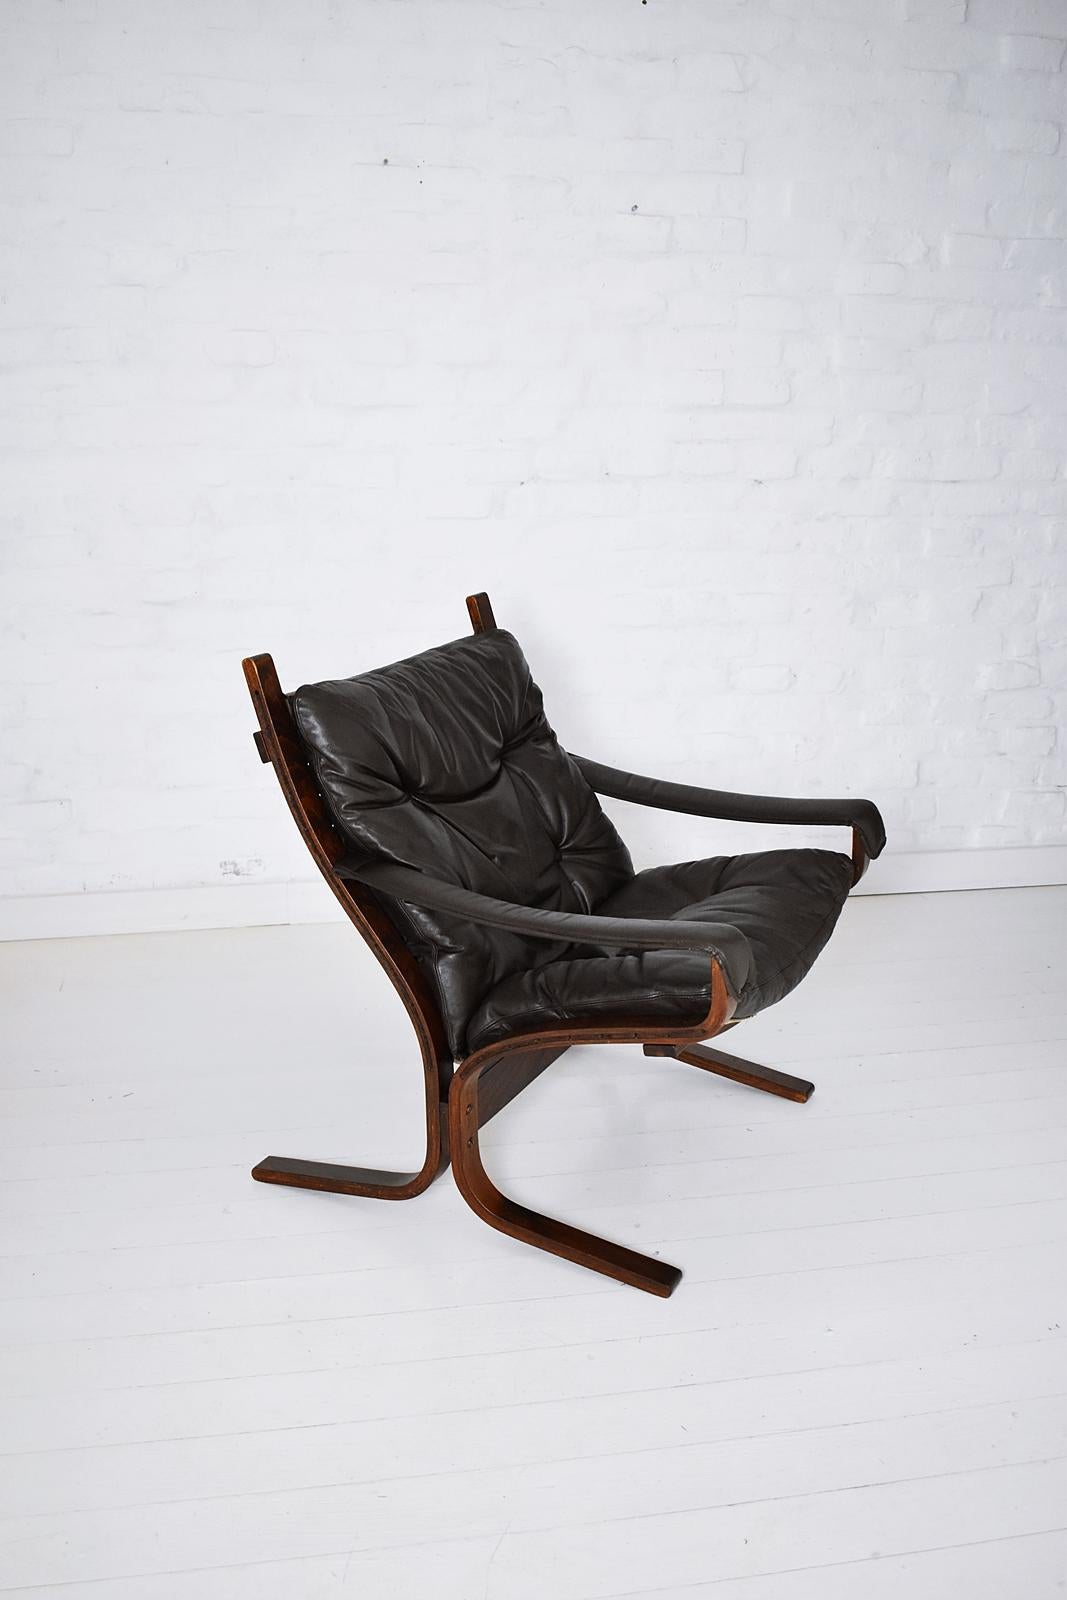 Stylish comfortable Ingmar Relling Siesta Scandinavian Modern lounge chair with stained bentwood frames and dark brown leather upholstery. In great original condition.